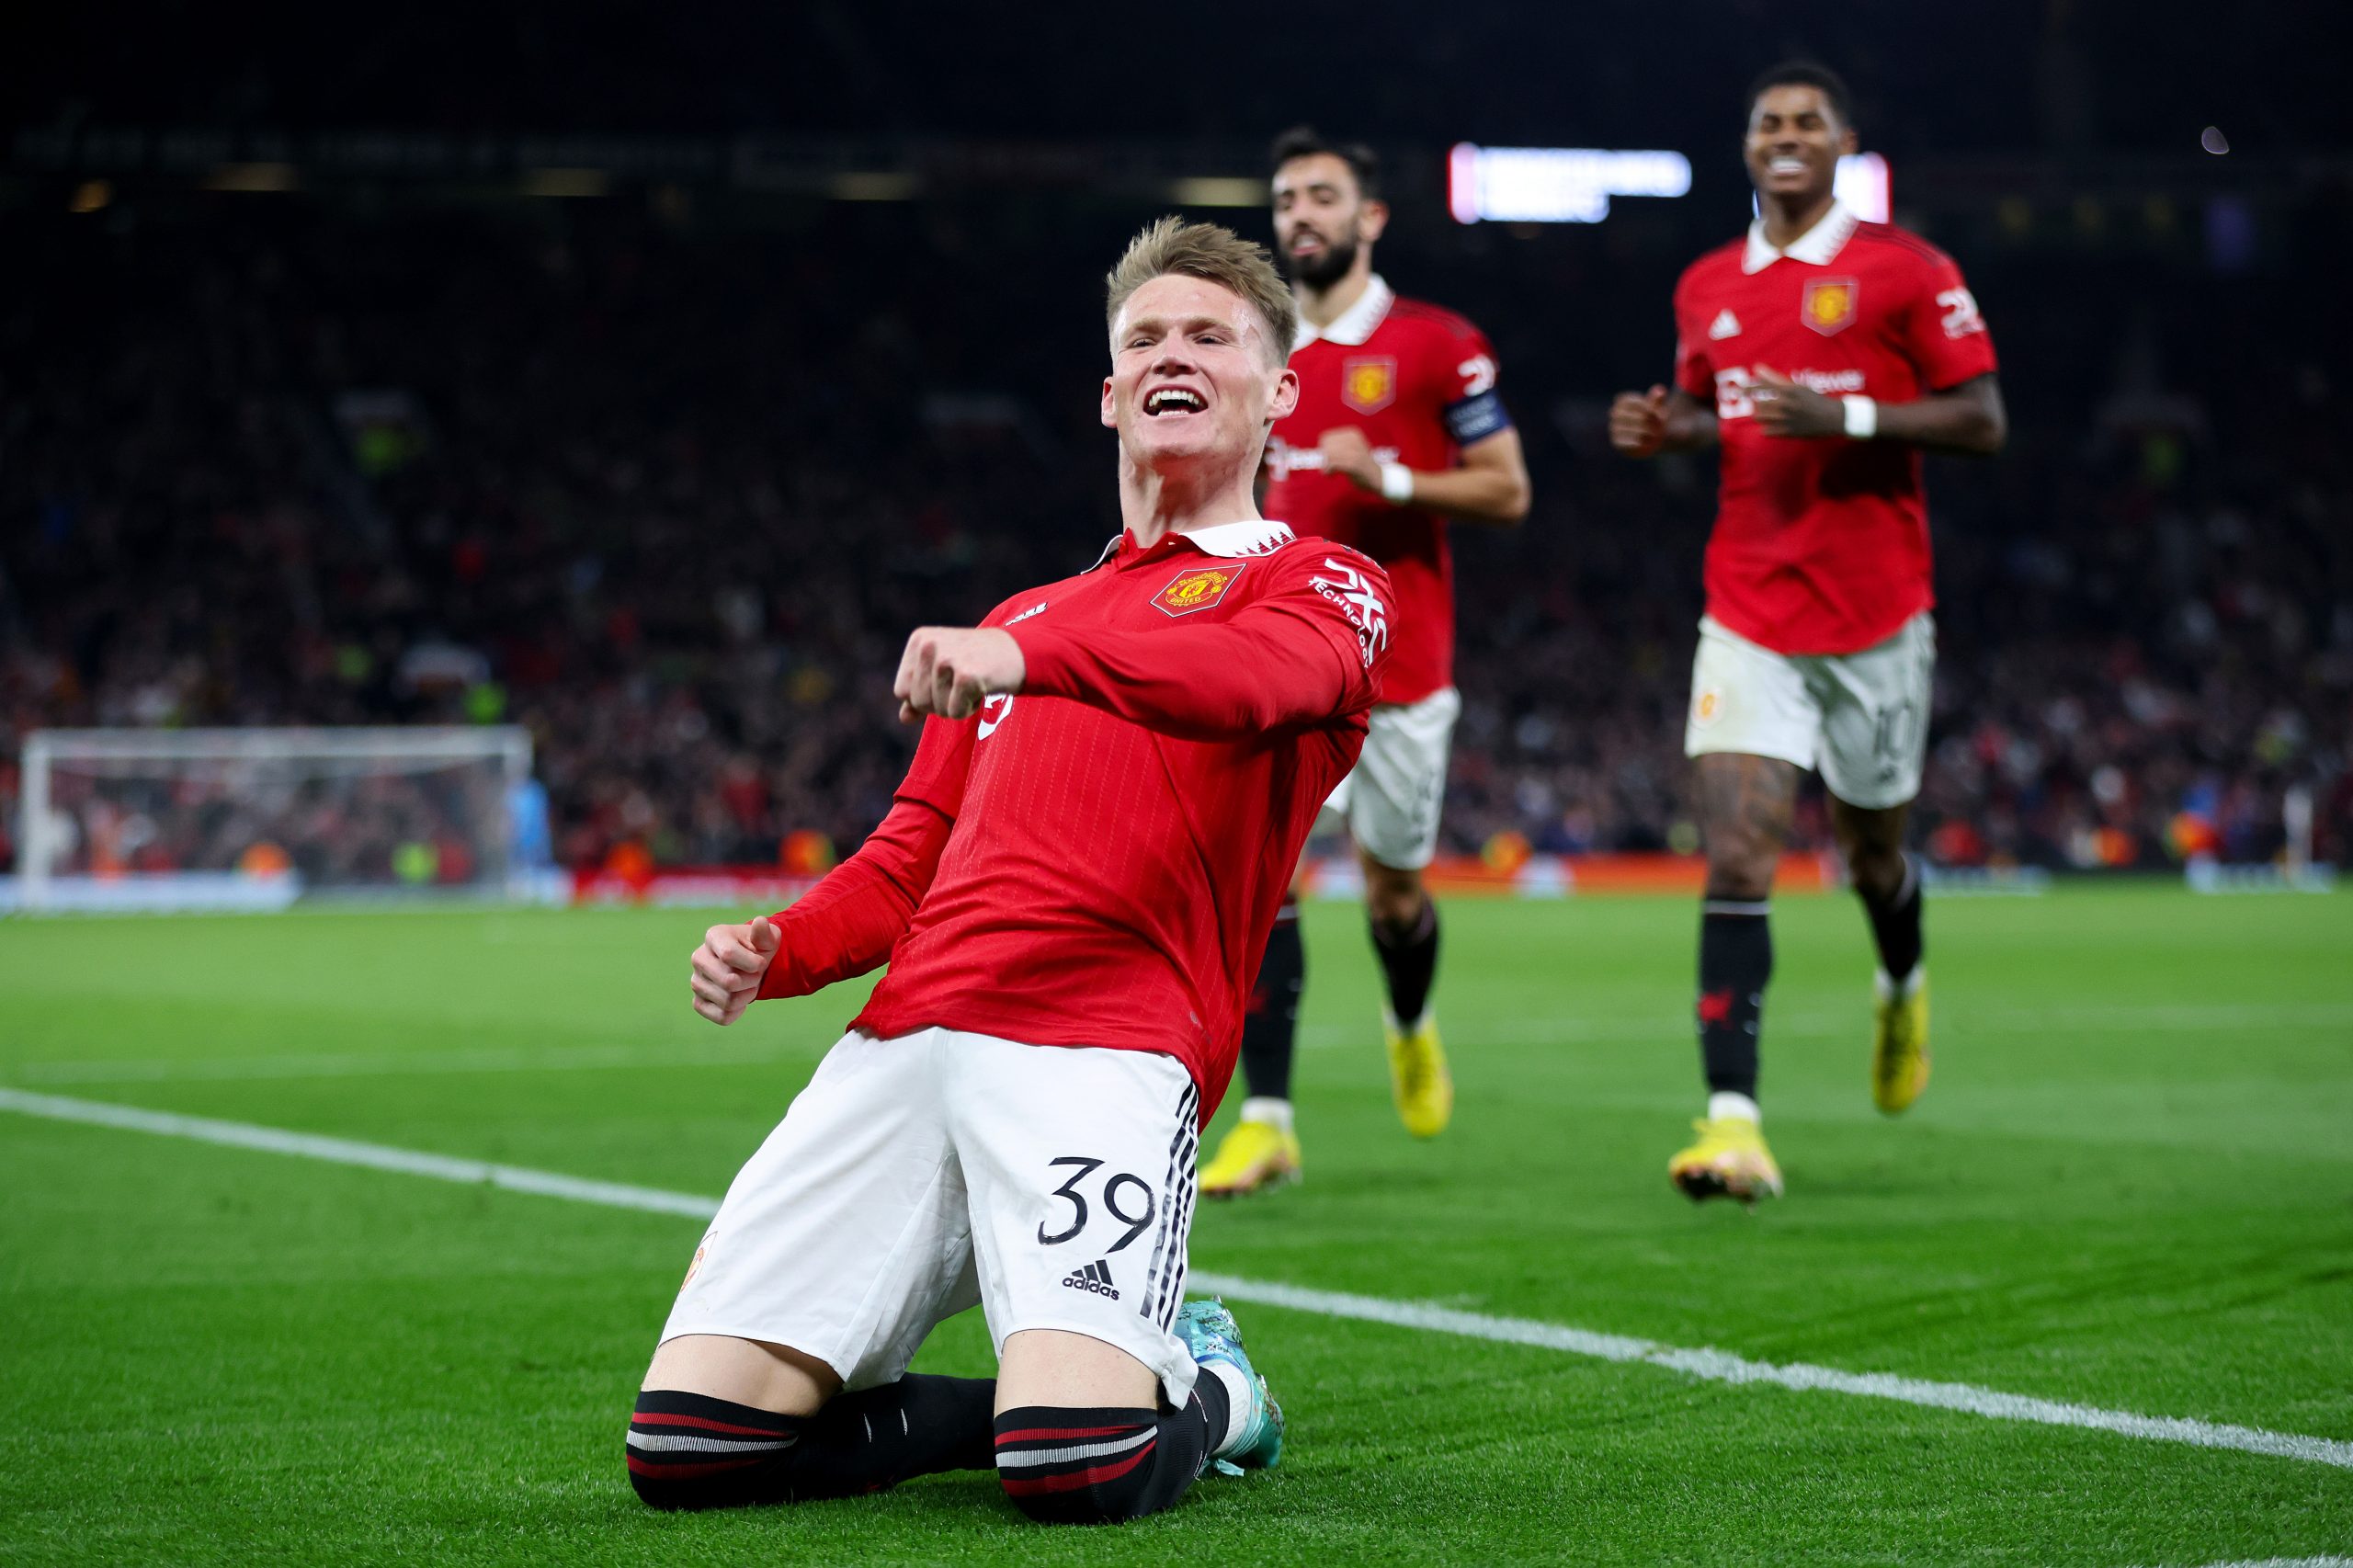 Scott McTominay celebrates after scoring the winner. (Photo by Clive Brunskill/Getty Images)